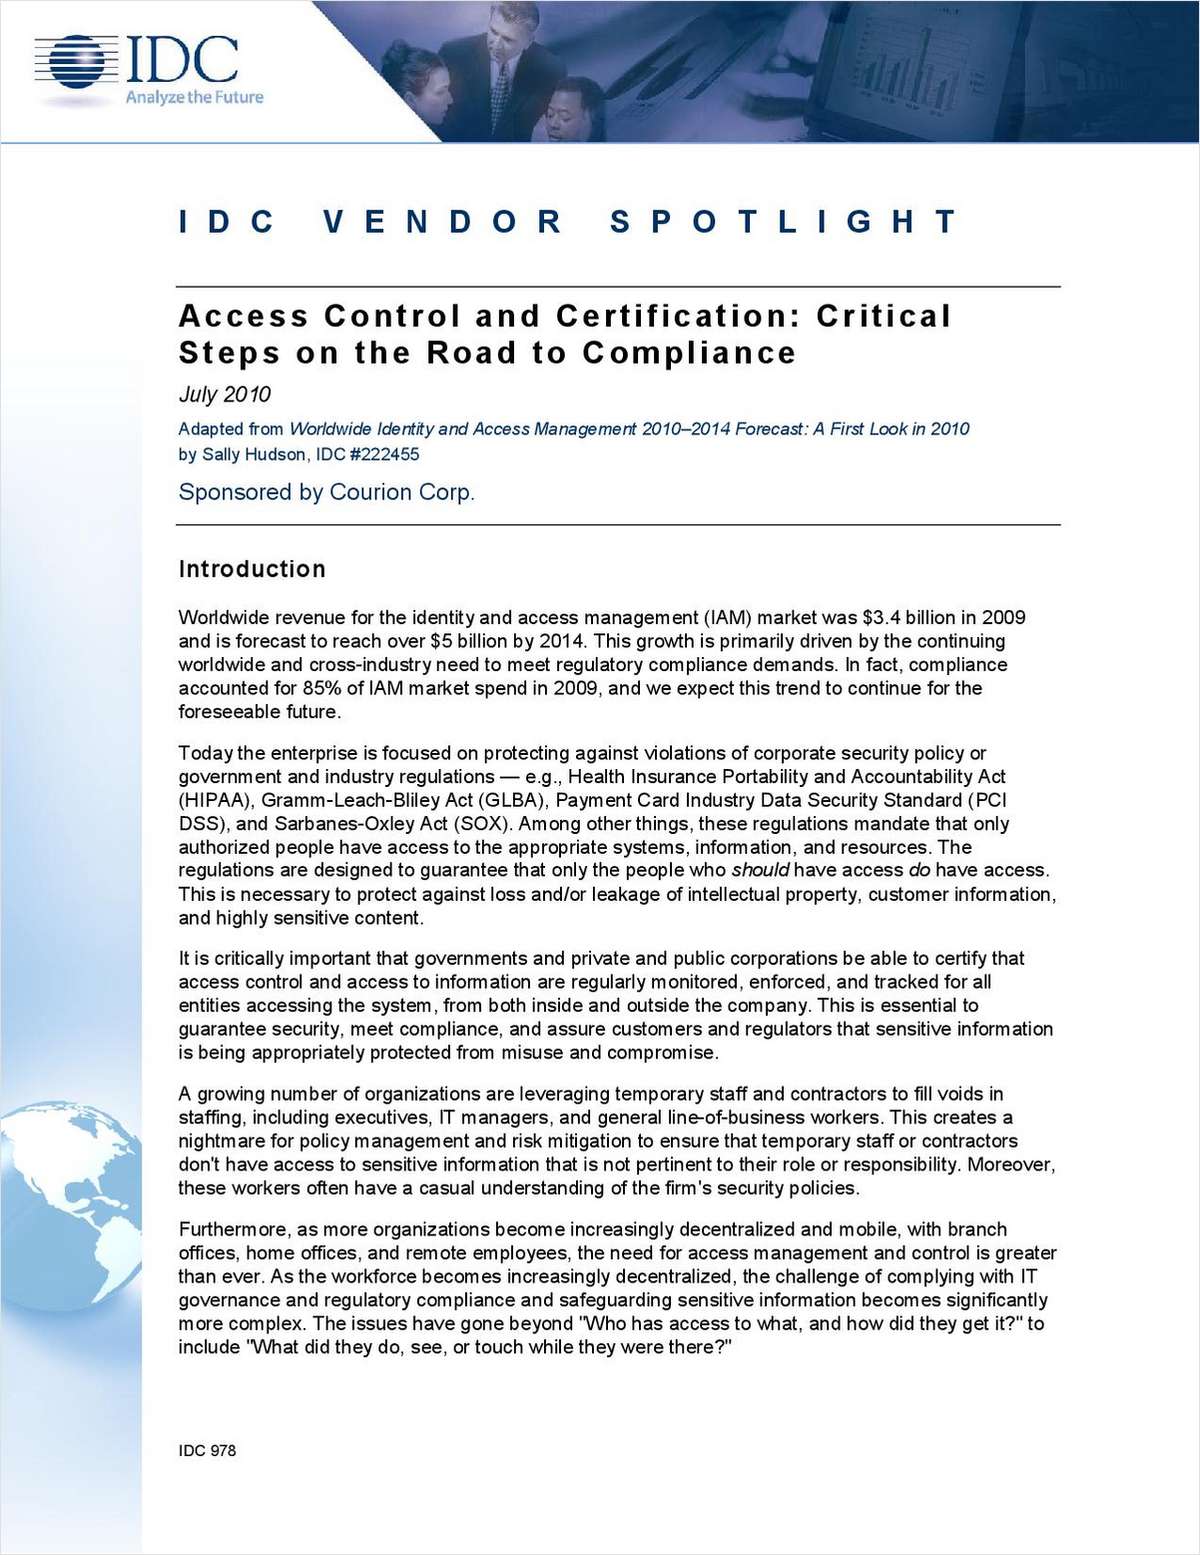 IDC Spotlight: Access Control and Certification